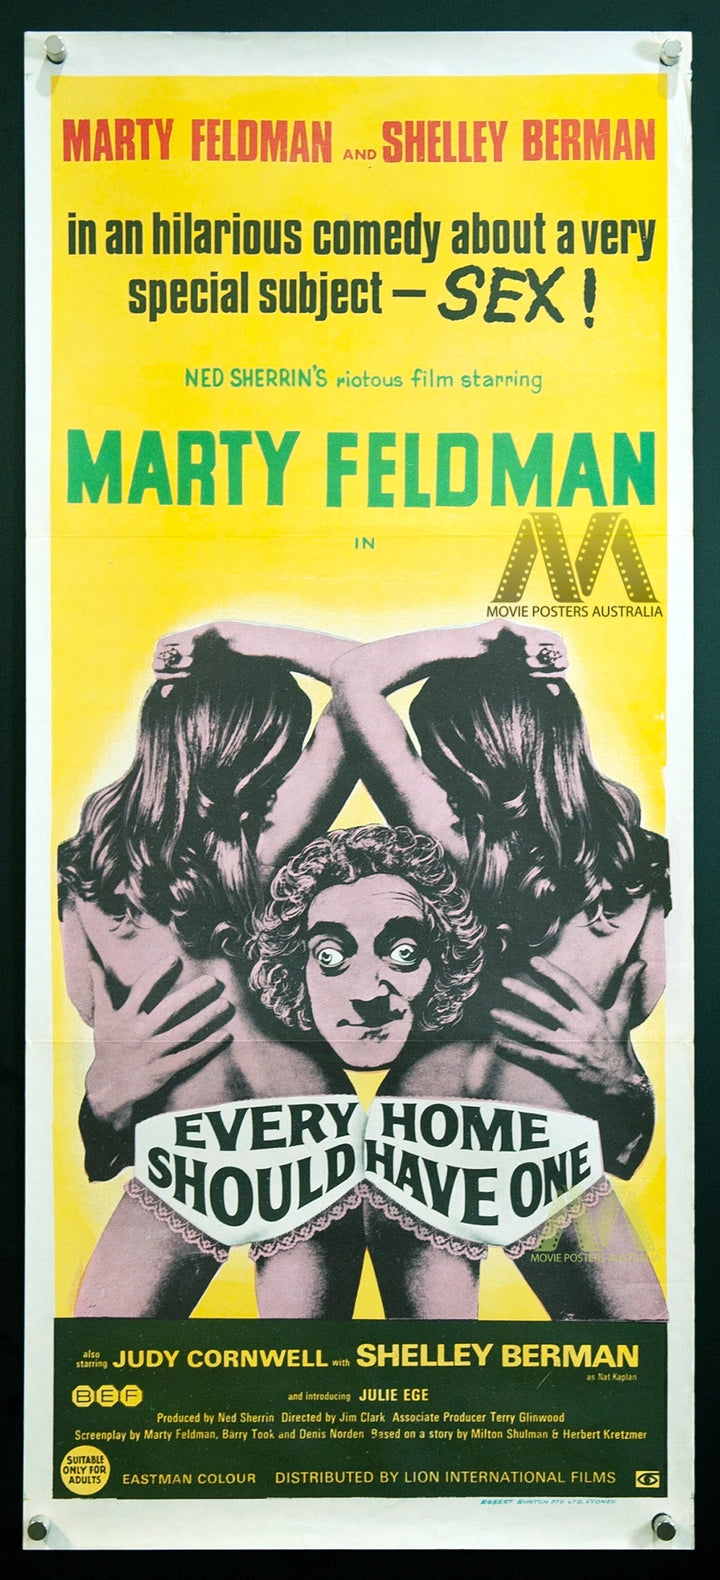 EVERY HOME SHOULD HAVE ONE (1970) Marty Feldman, Daybill. - Movie Posters Australia